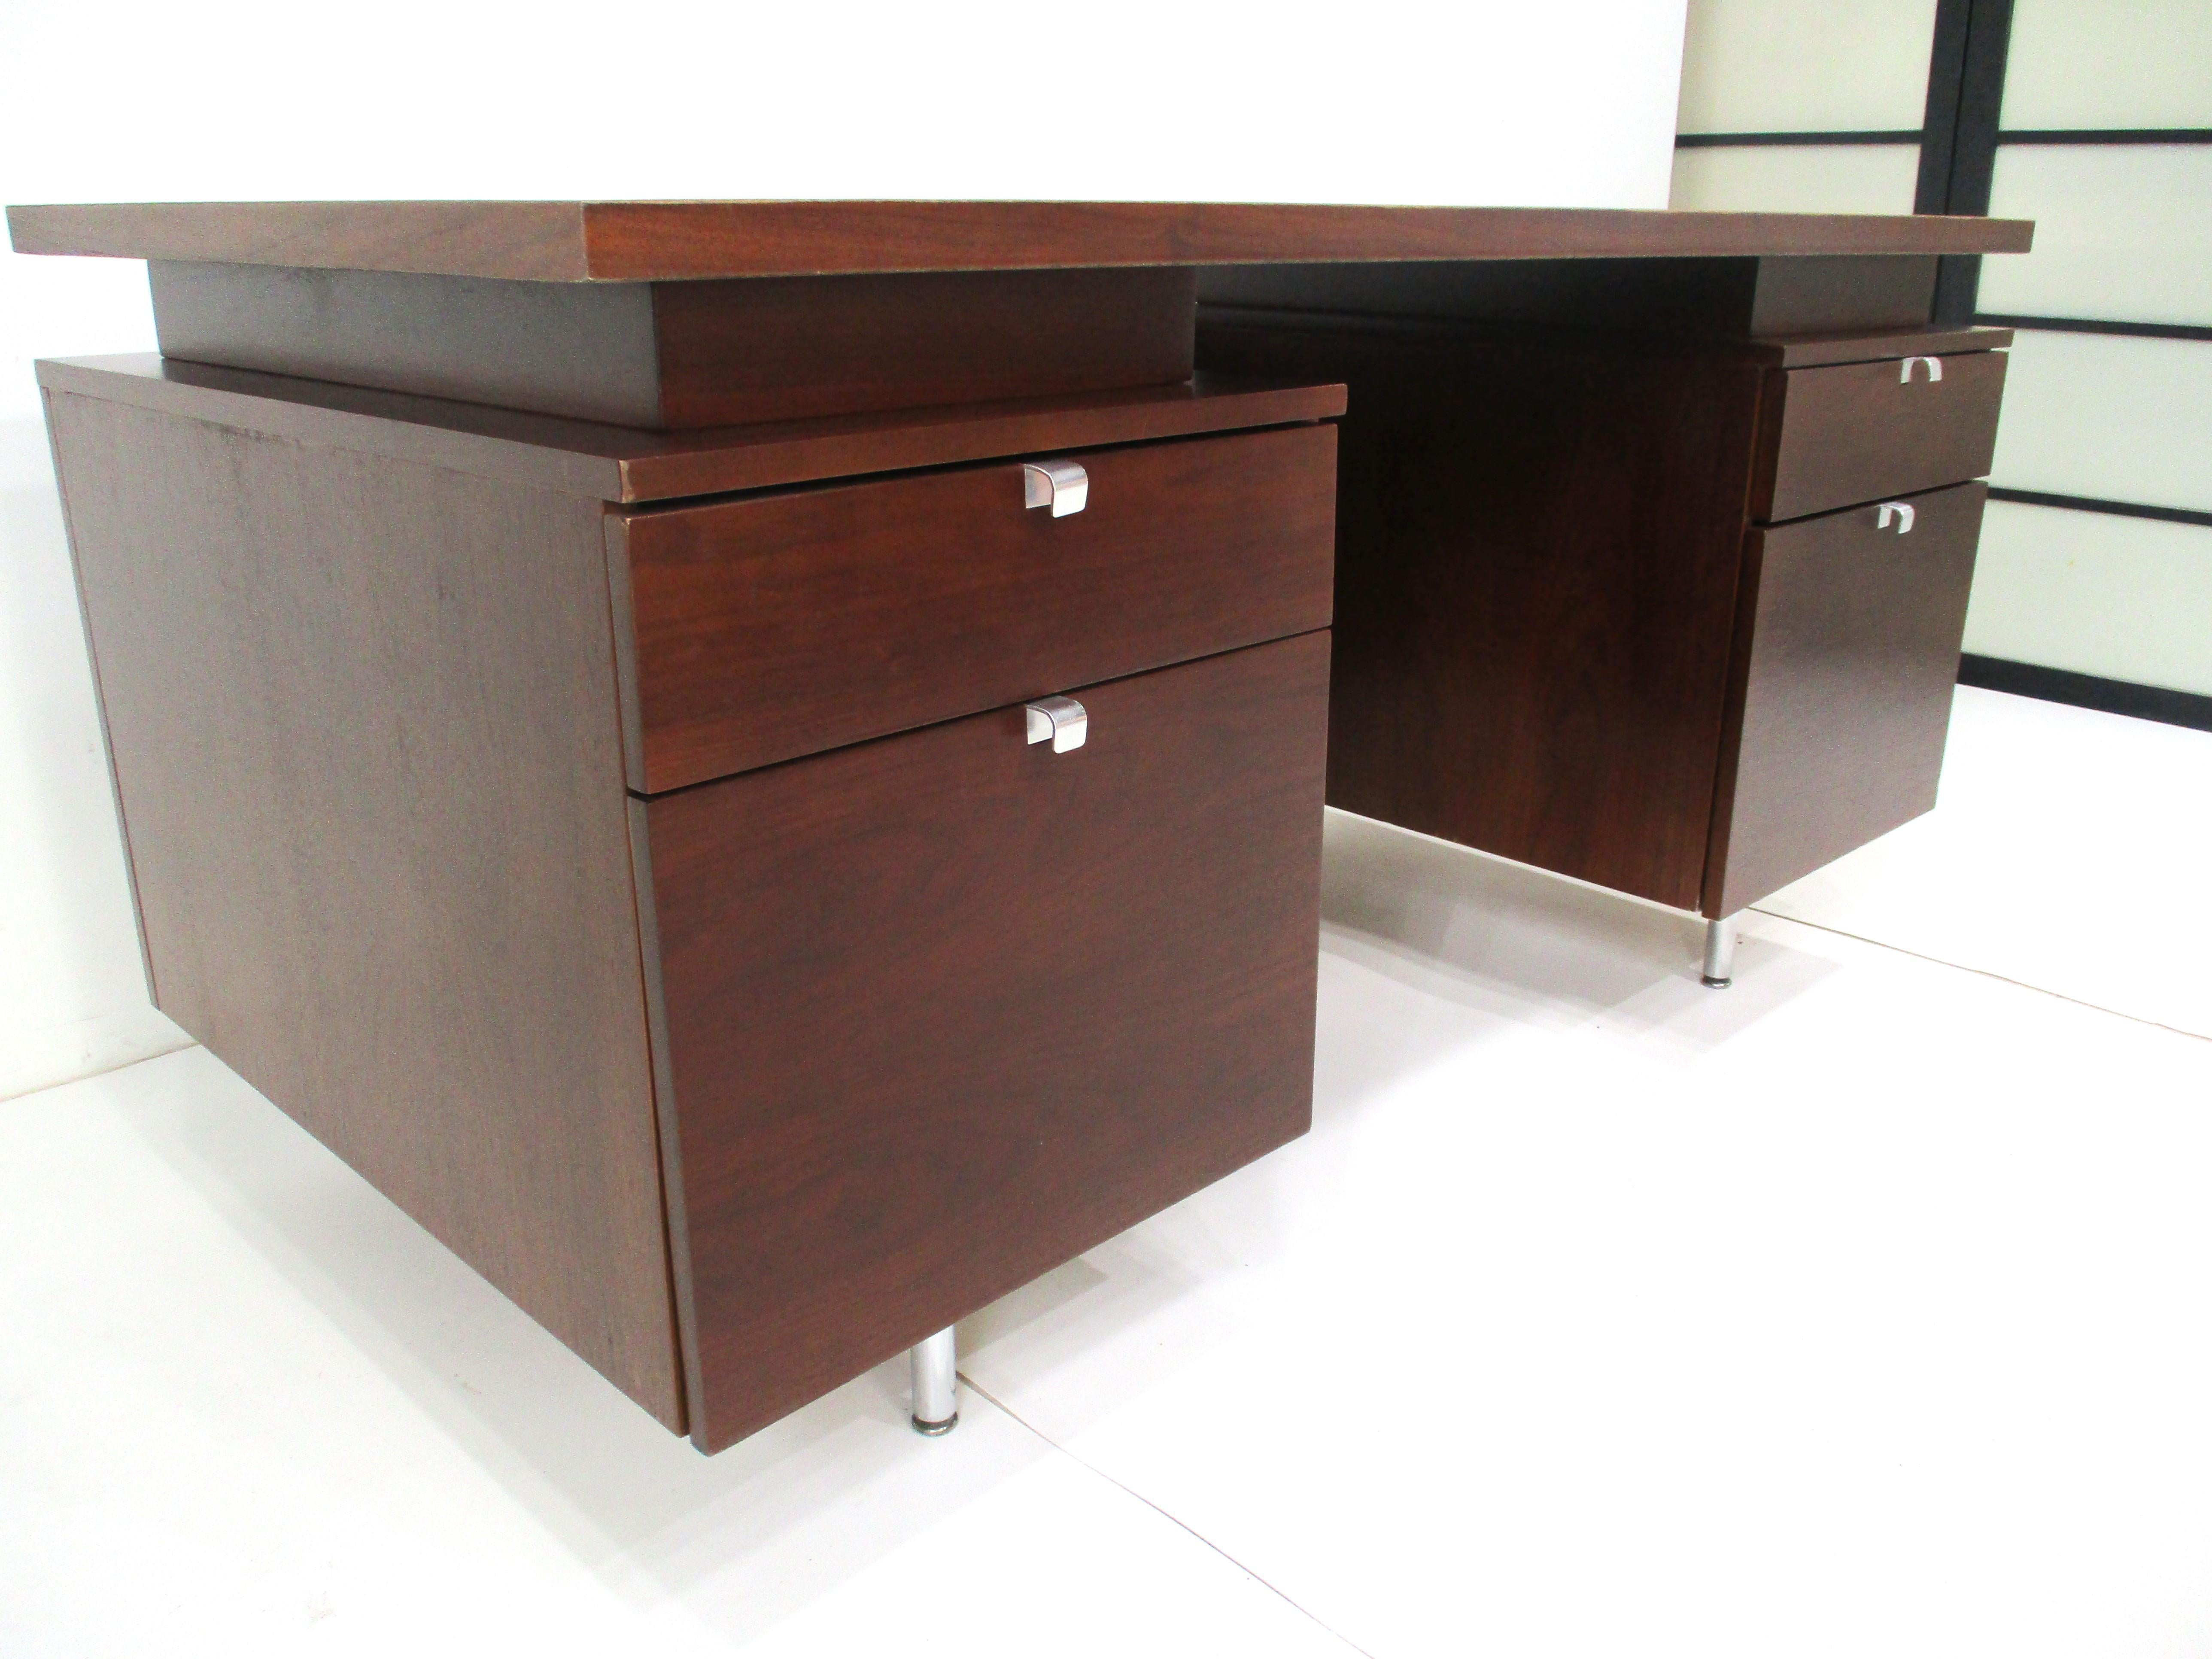 A dark walnut executive desk with a floating top having a smaller drawer and larger file drawer to each side . Aluminum pulls and brushed stainless steel legs enhance the look and feel of this very well crafted piece . The desk comes from the Irwin